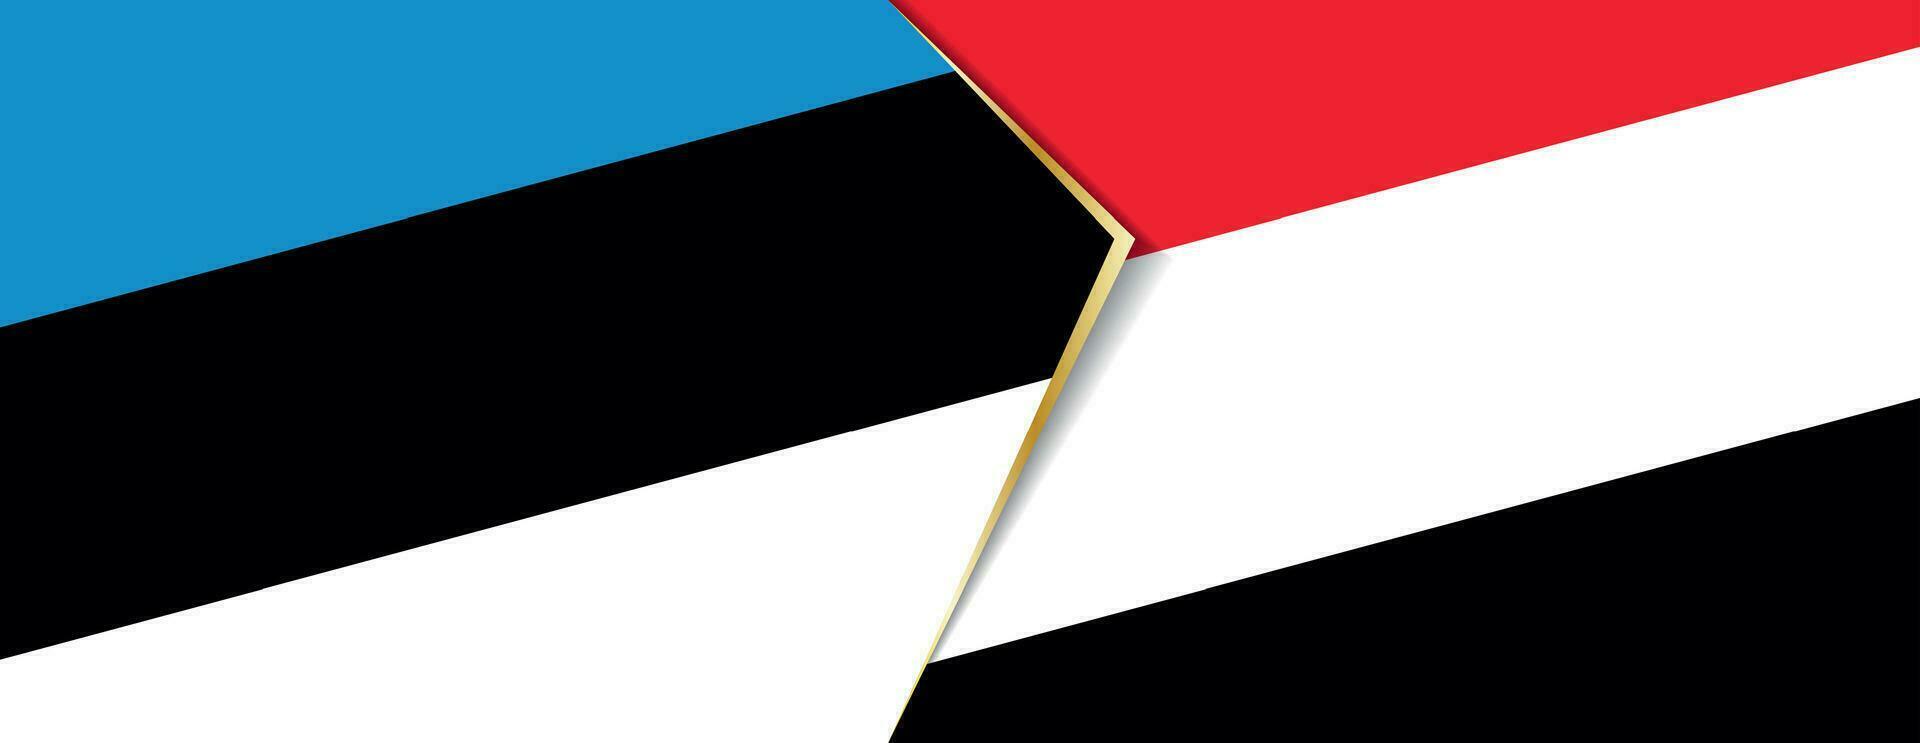 Estonia and Yemen flags, two vector flags.